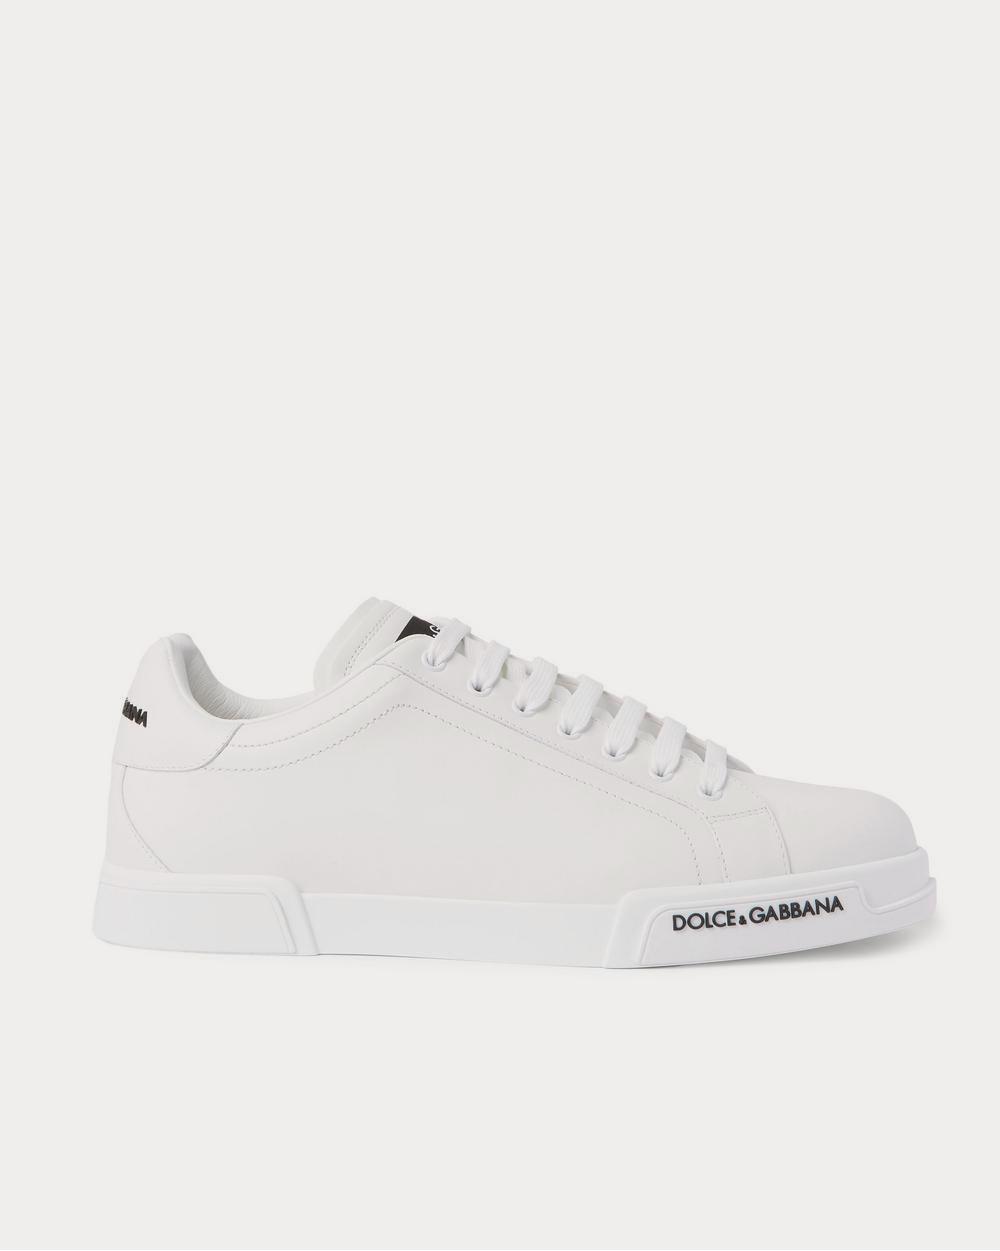 Dolce & Gabbana - Logo-Appliquéd Rubber-Trimmed Leather  White low top sneakers